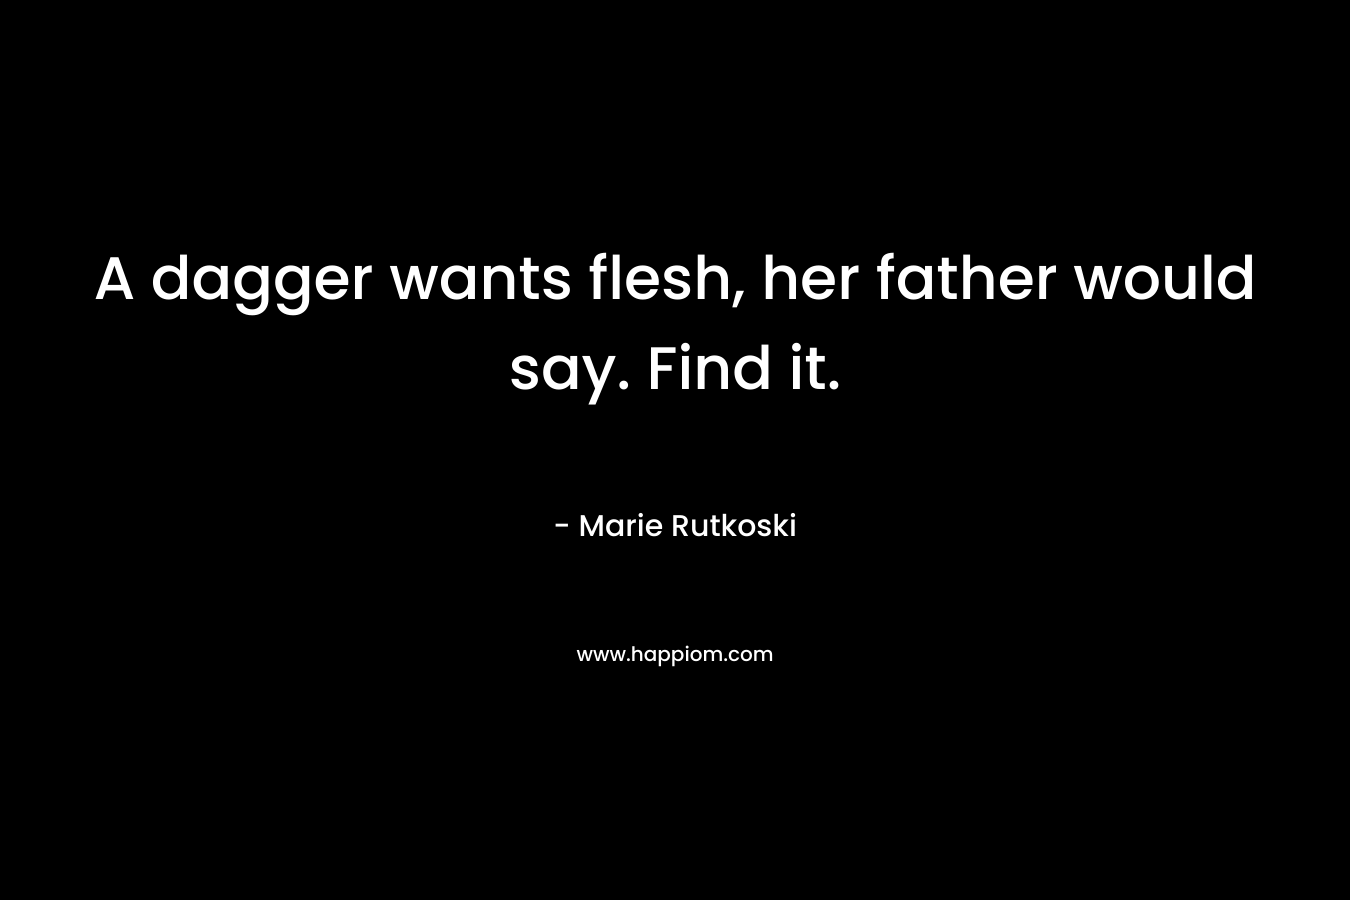 A dagger wants flesh, her father would say. Find it.